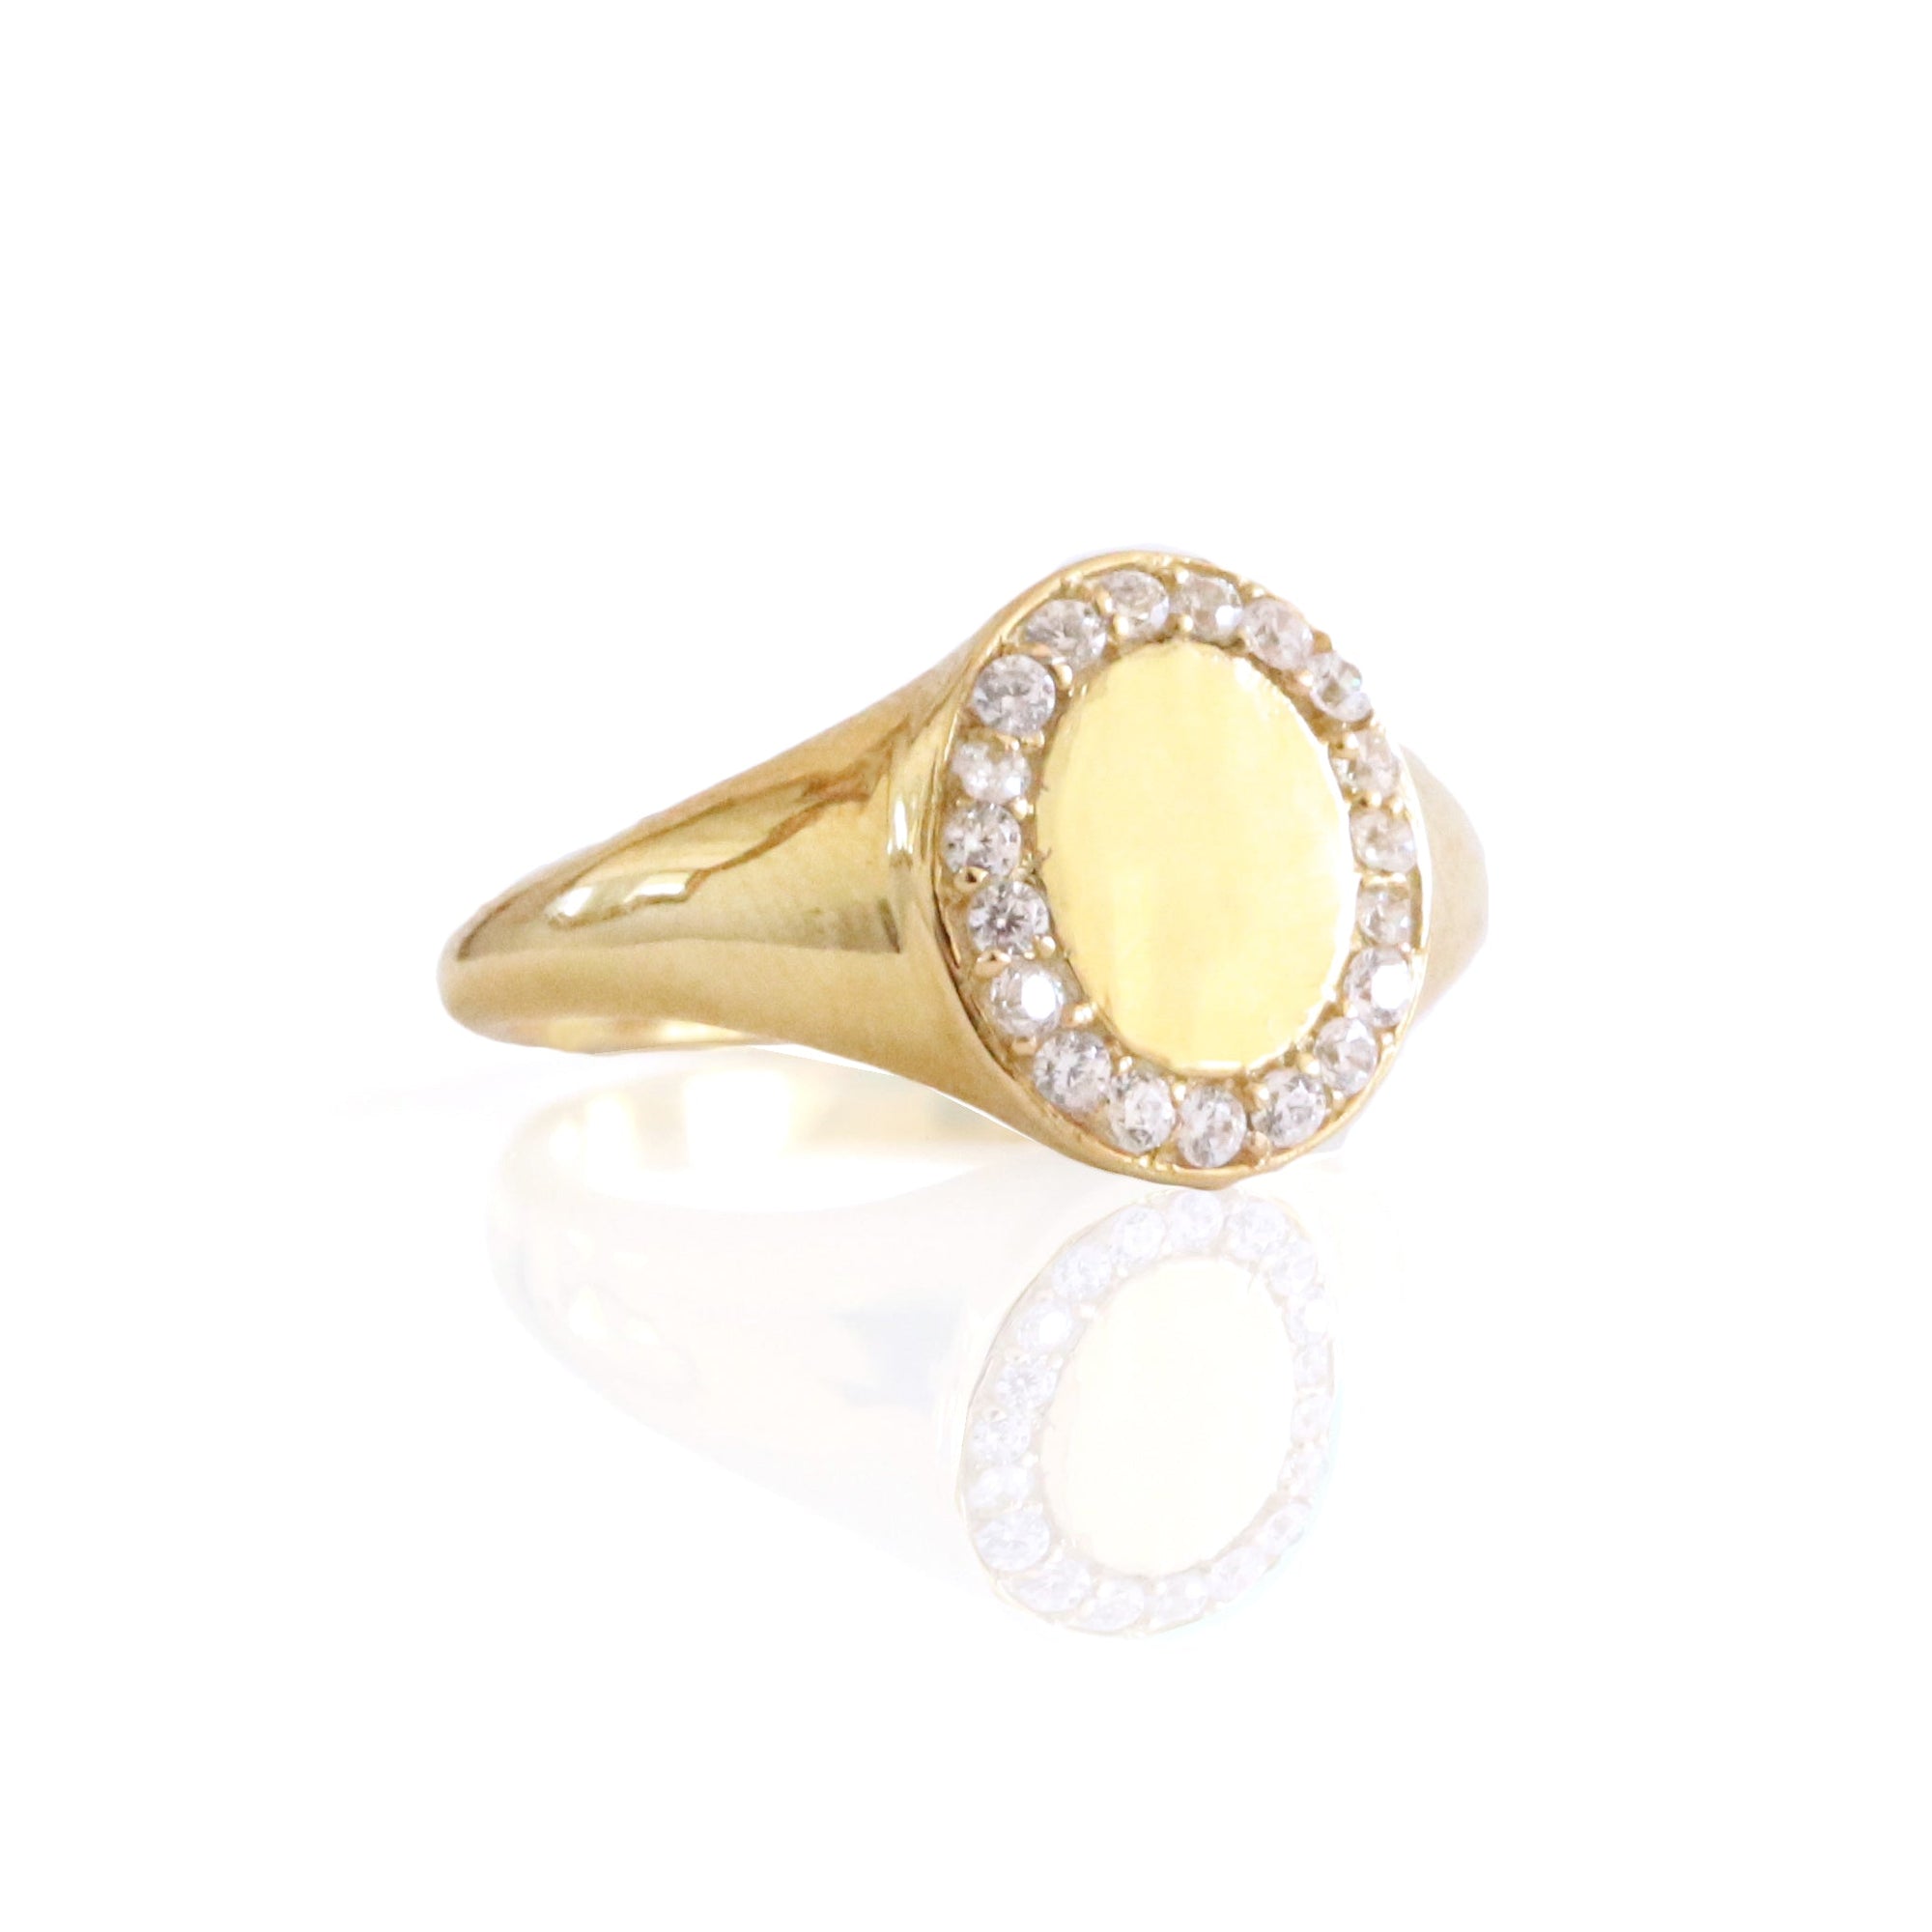 LOVE OVAL SIGNET RING - CUBIC ZIRCONIA & GOLD - SO PRETTY CARA COTTER